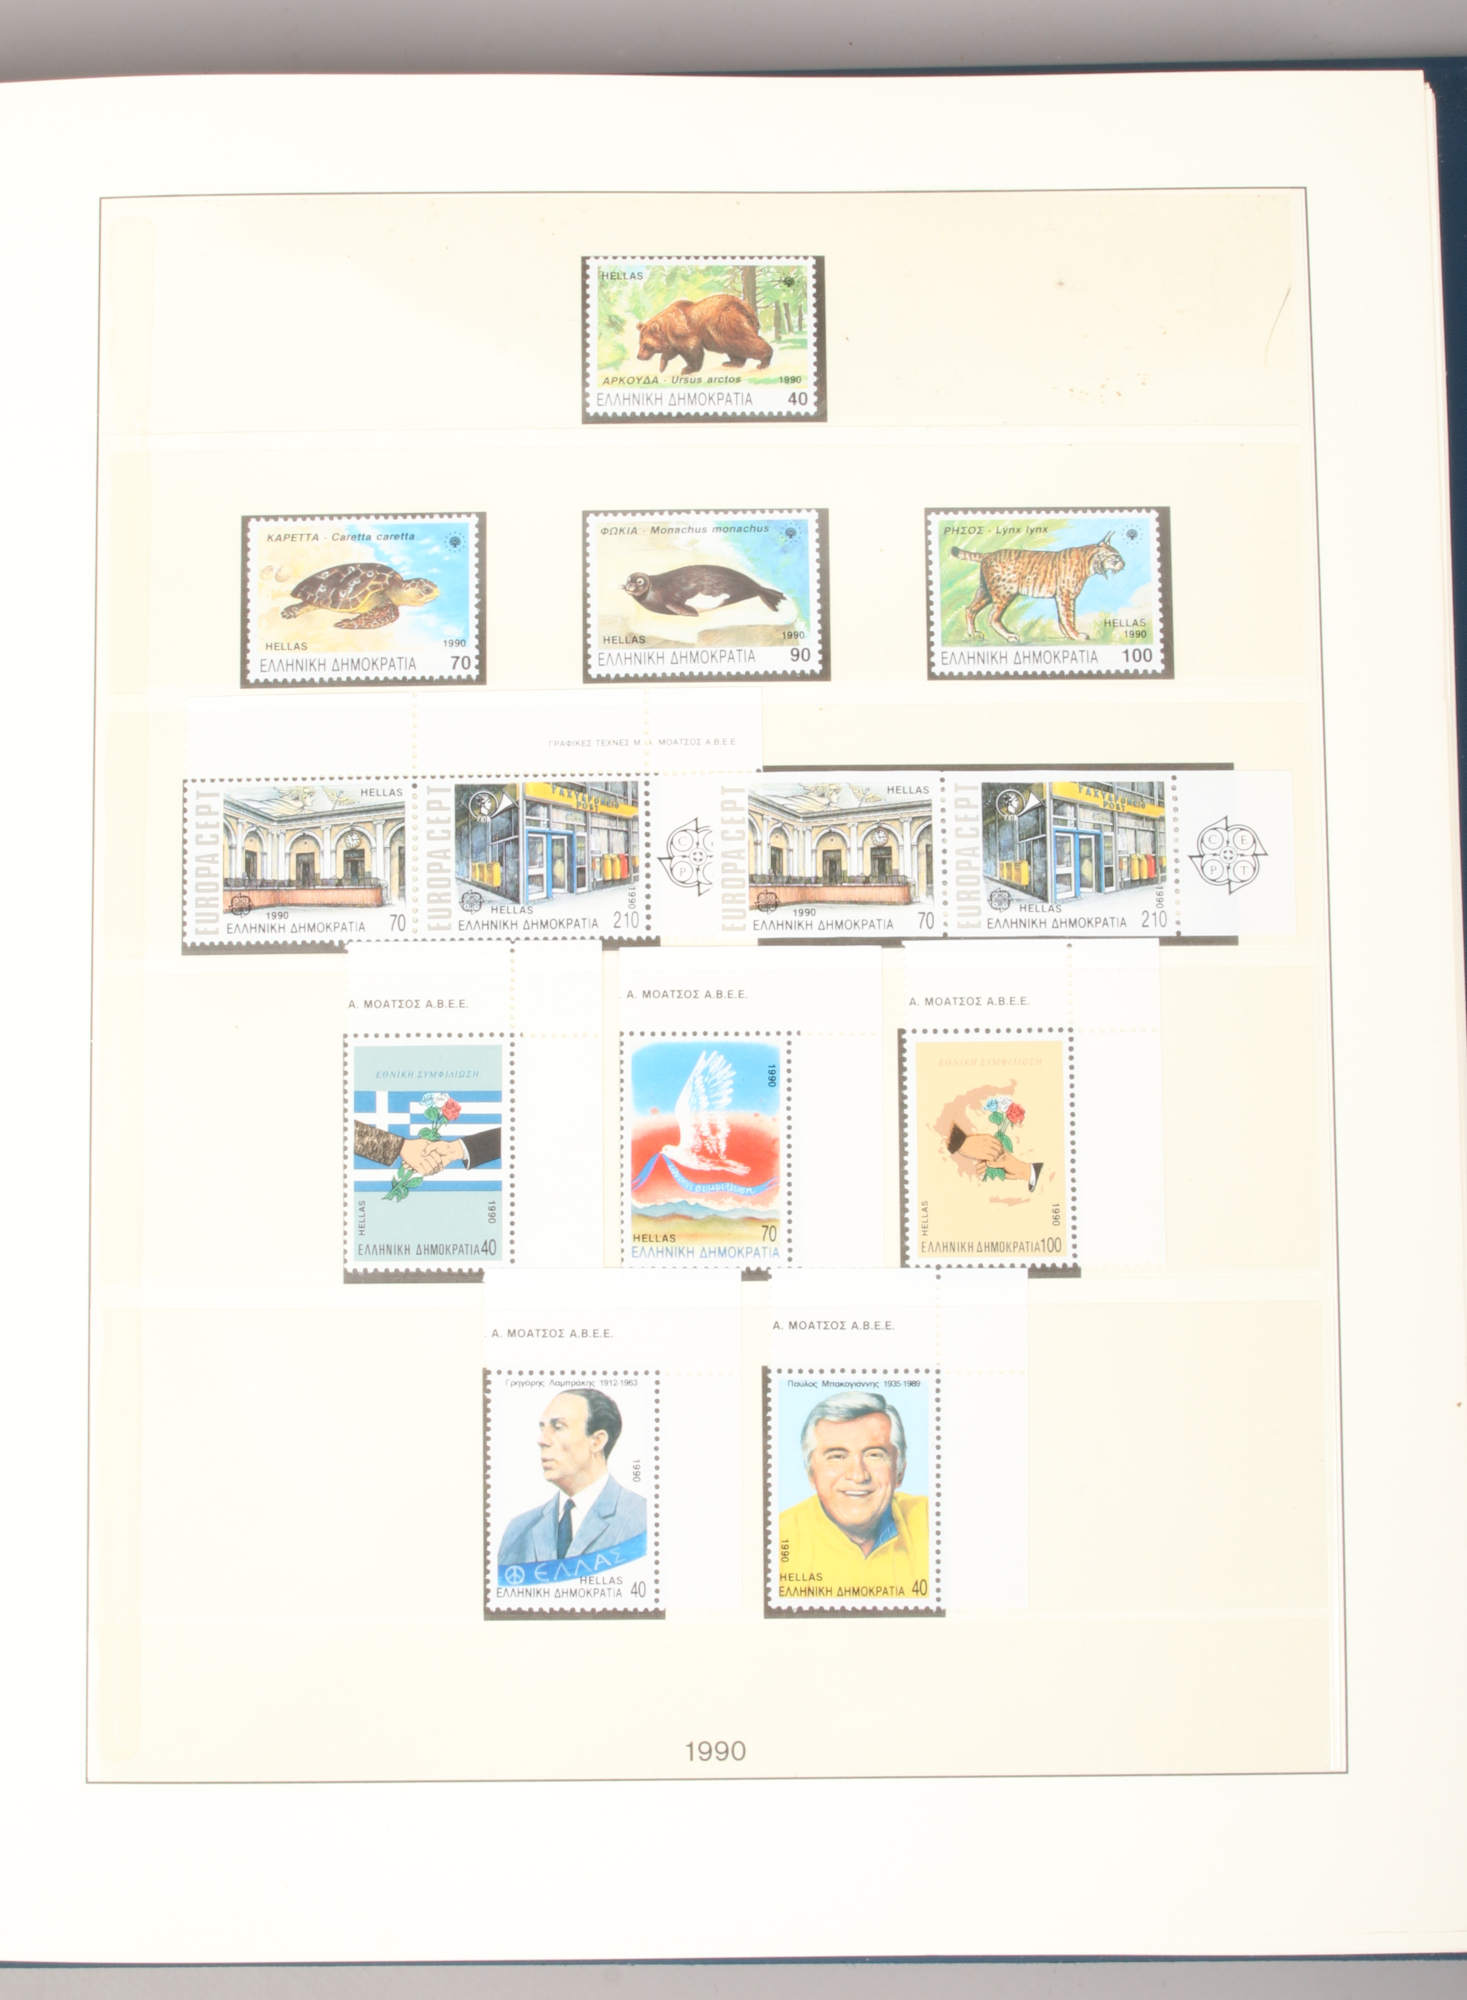 An album of Greek stamps.